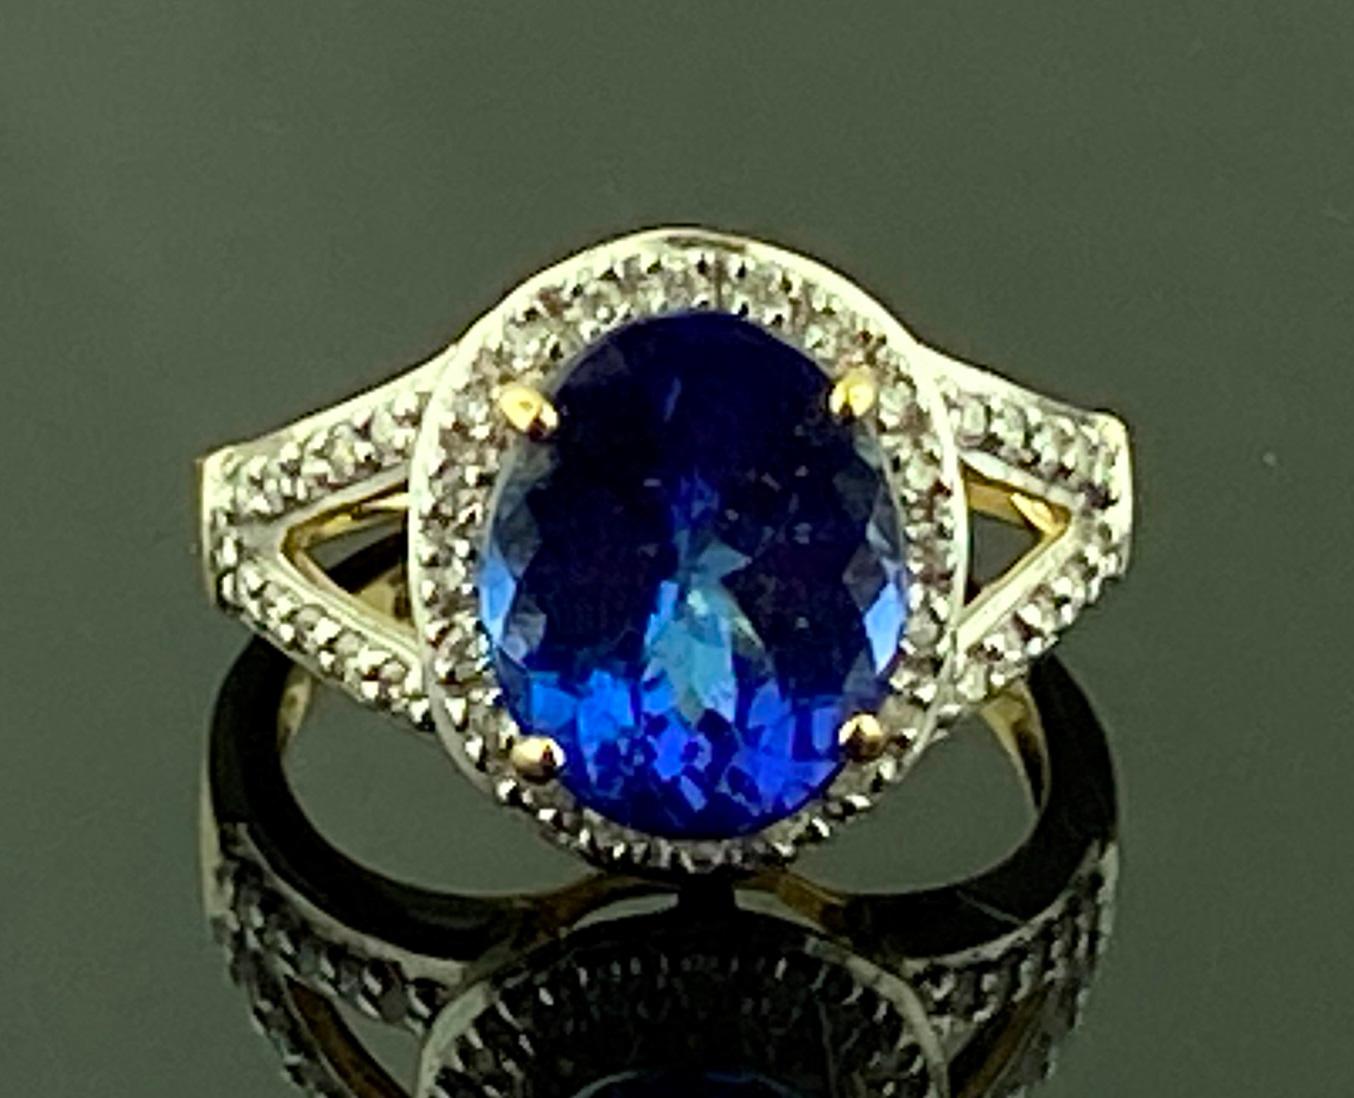 Set in 14 karat yellow gold, weighing 3.72 grams, is one 3.00 carat Oval Cut Tanzanite with 40 Round Brilliant Cut Diamonds weighing approximately 0.20 carats, Color: G-H, Clarity: SI-1.  Ring size is 5.